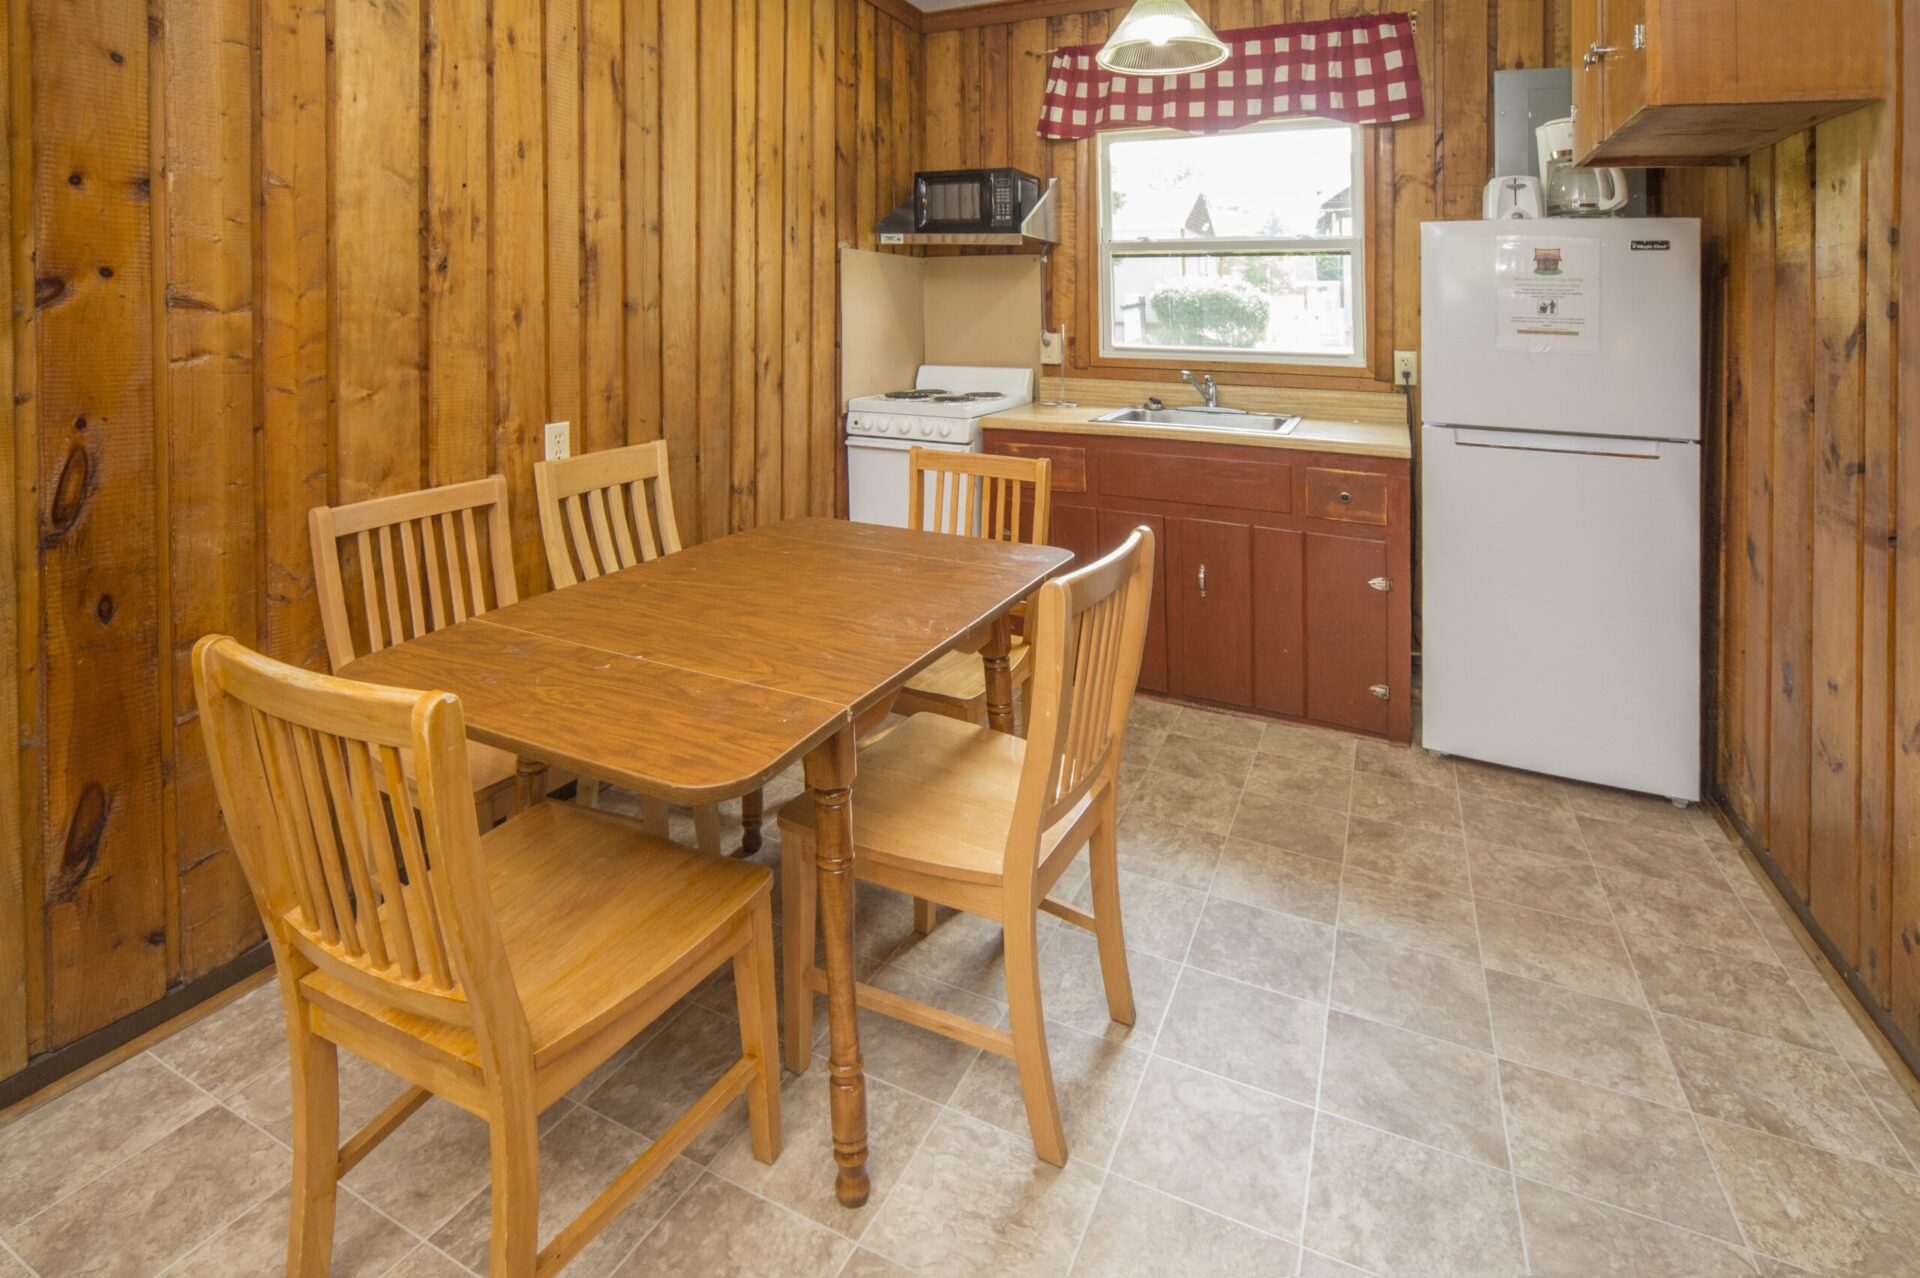 kitchenette with dining table and chairs